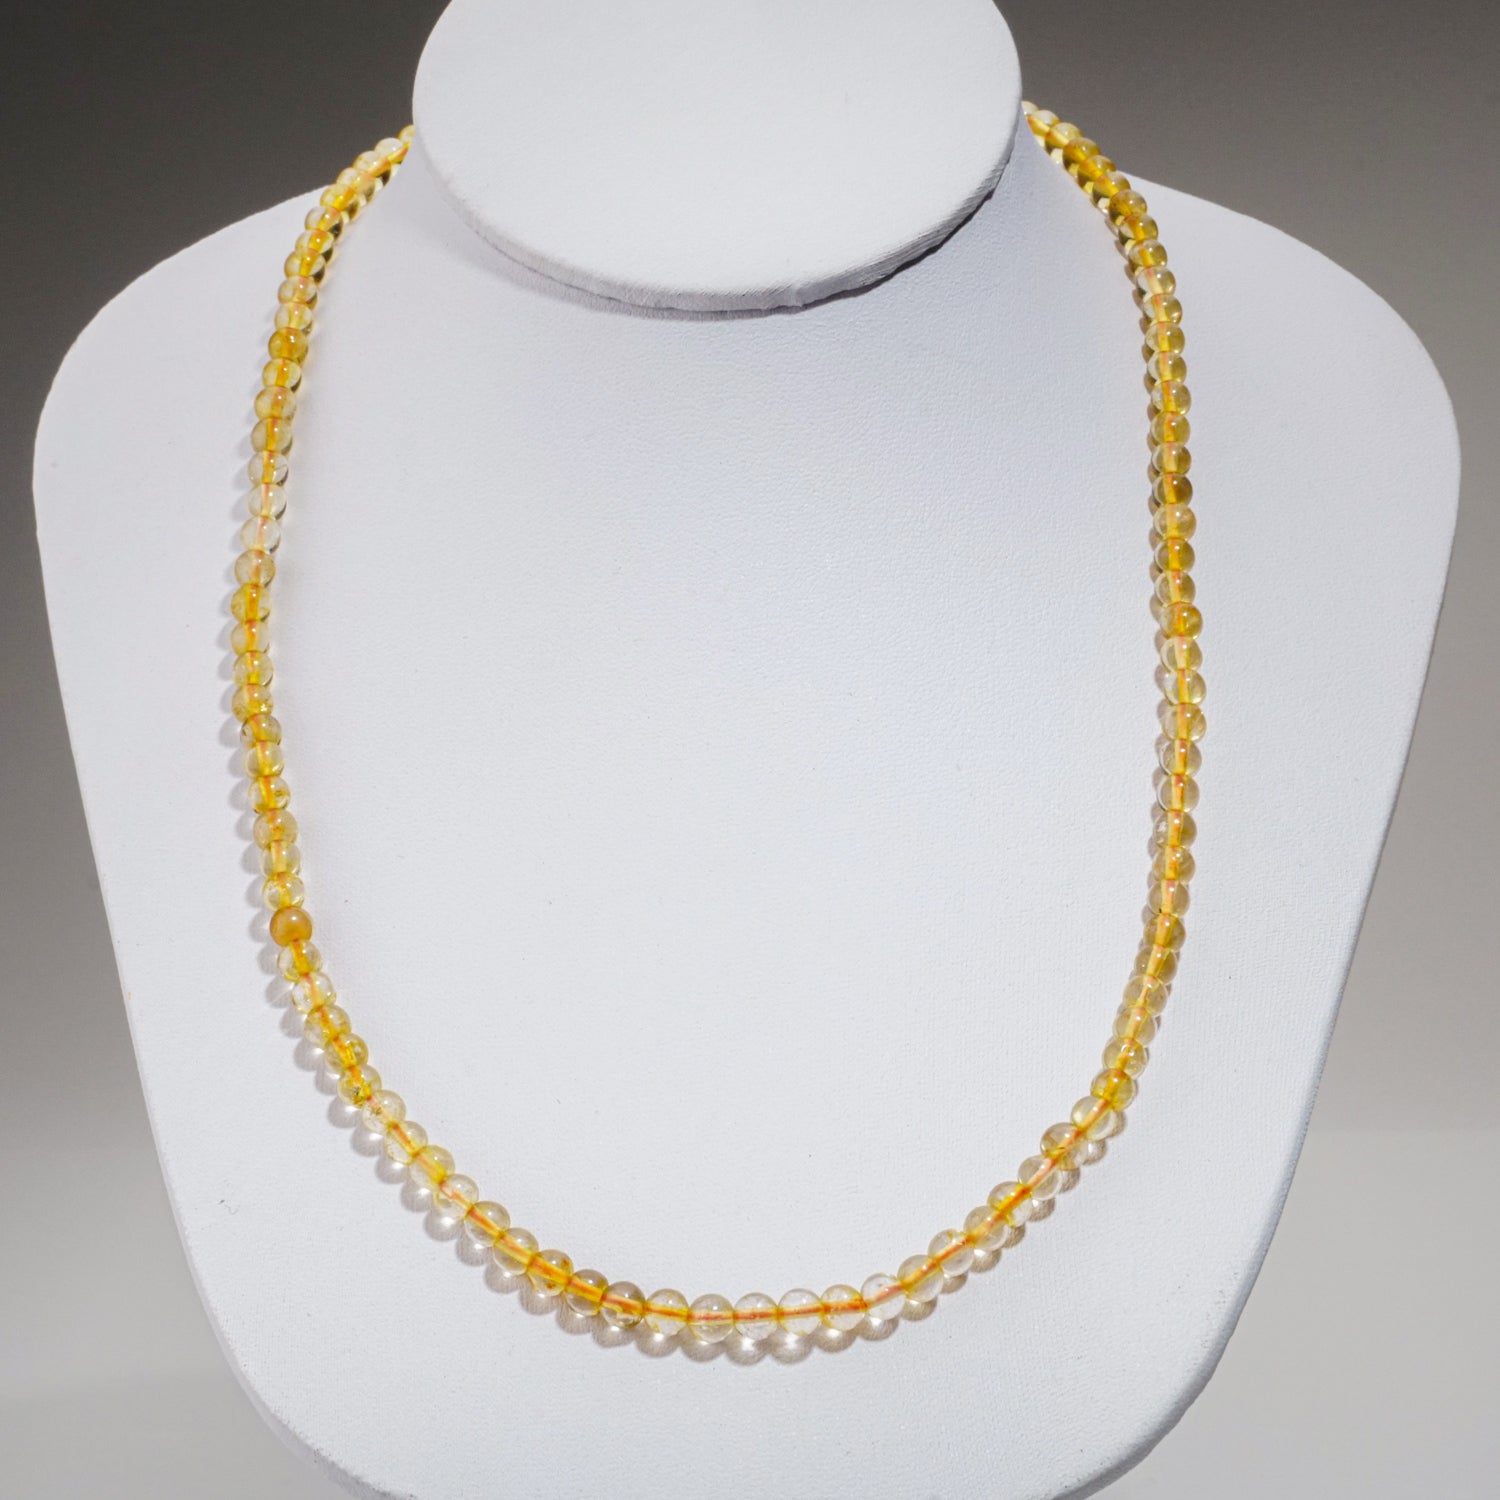 Genuine Citrine 4mm Beaded 22 Inch Necklace on Elastic Cord